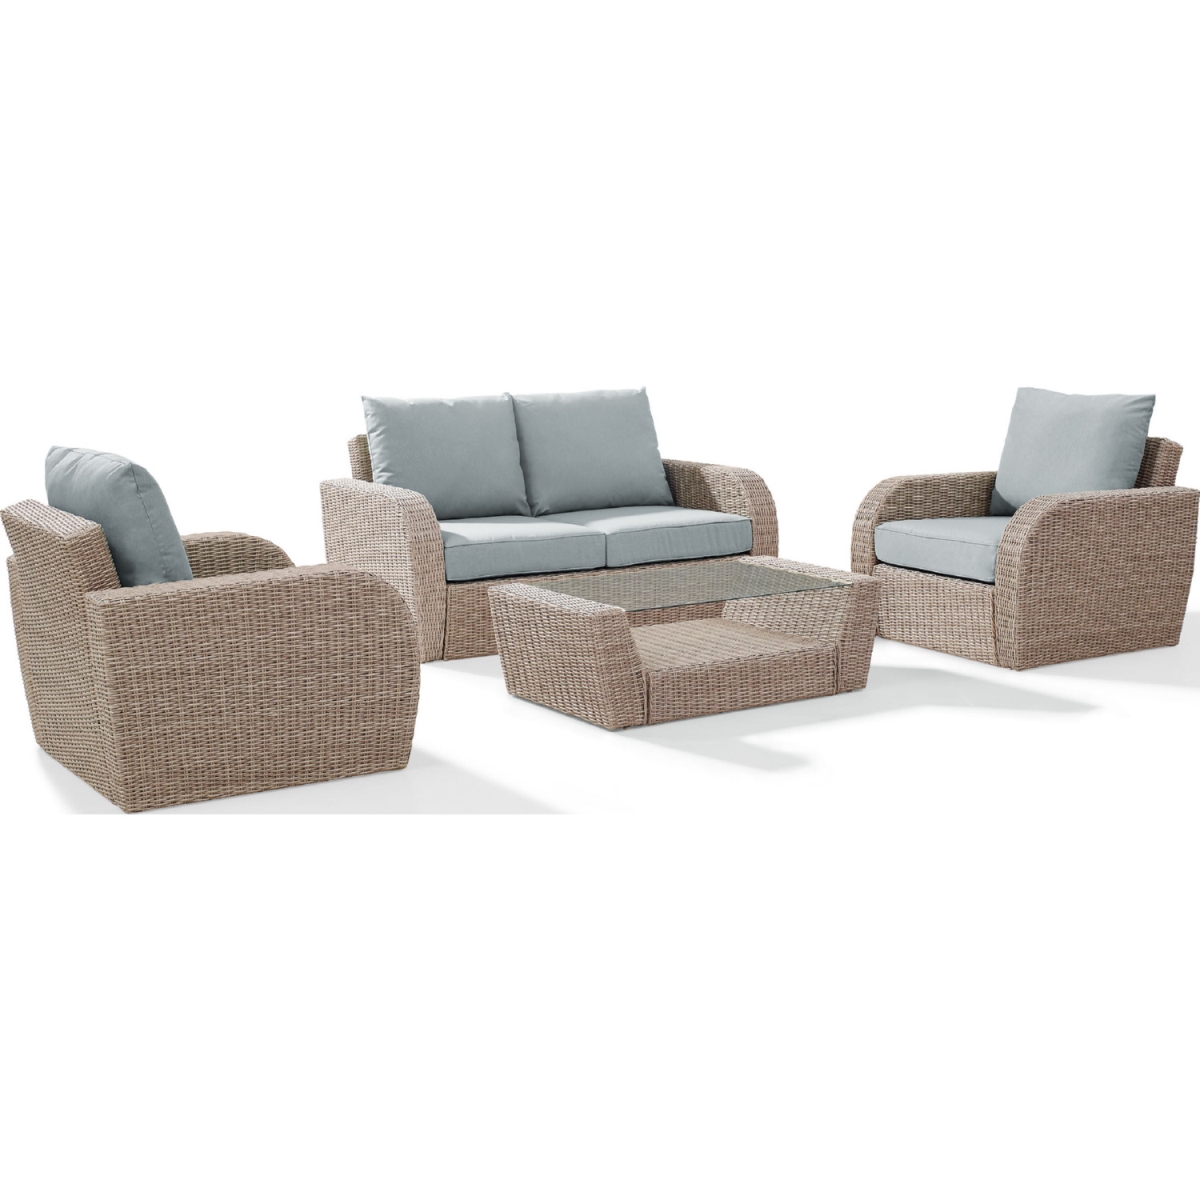 Ko70132wh-mi 4 Piece St. Augustine Outdoor Wicker Seating Set With Mist Cushion - Loveseat, Two Chairs, Coffee Table